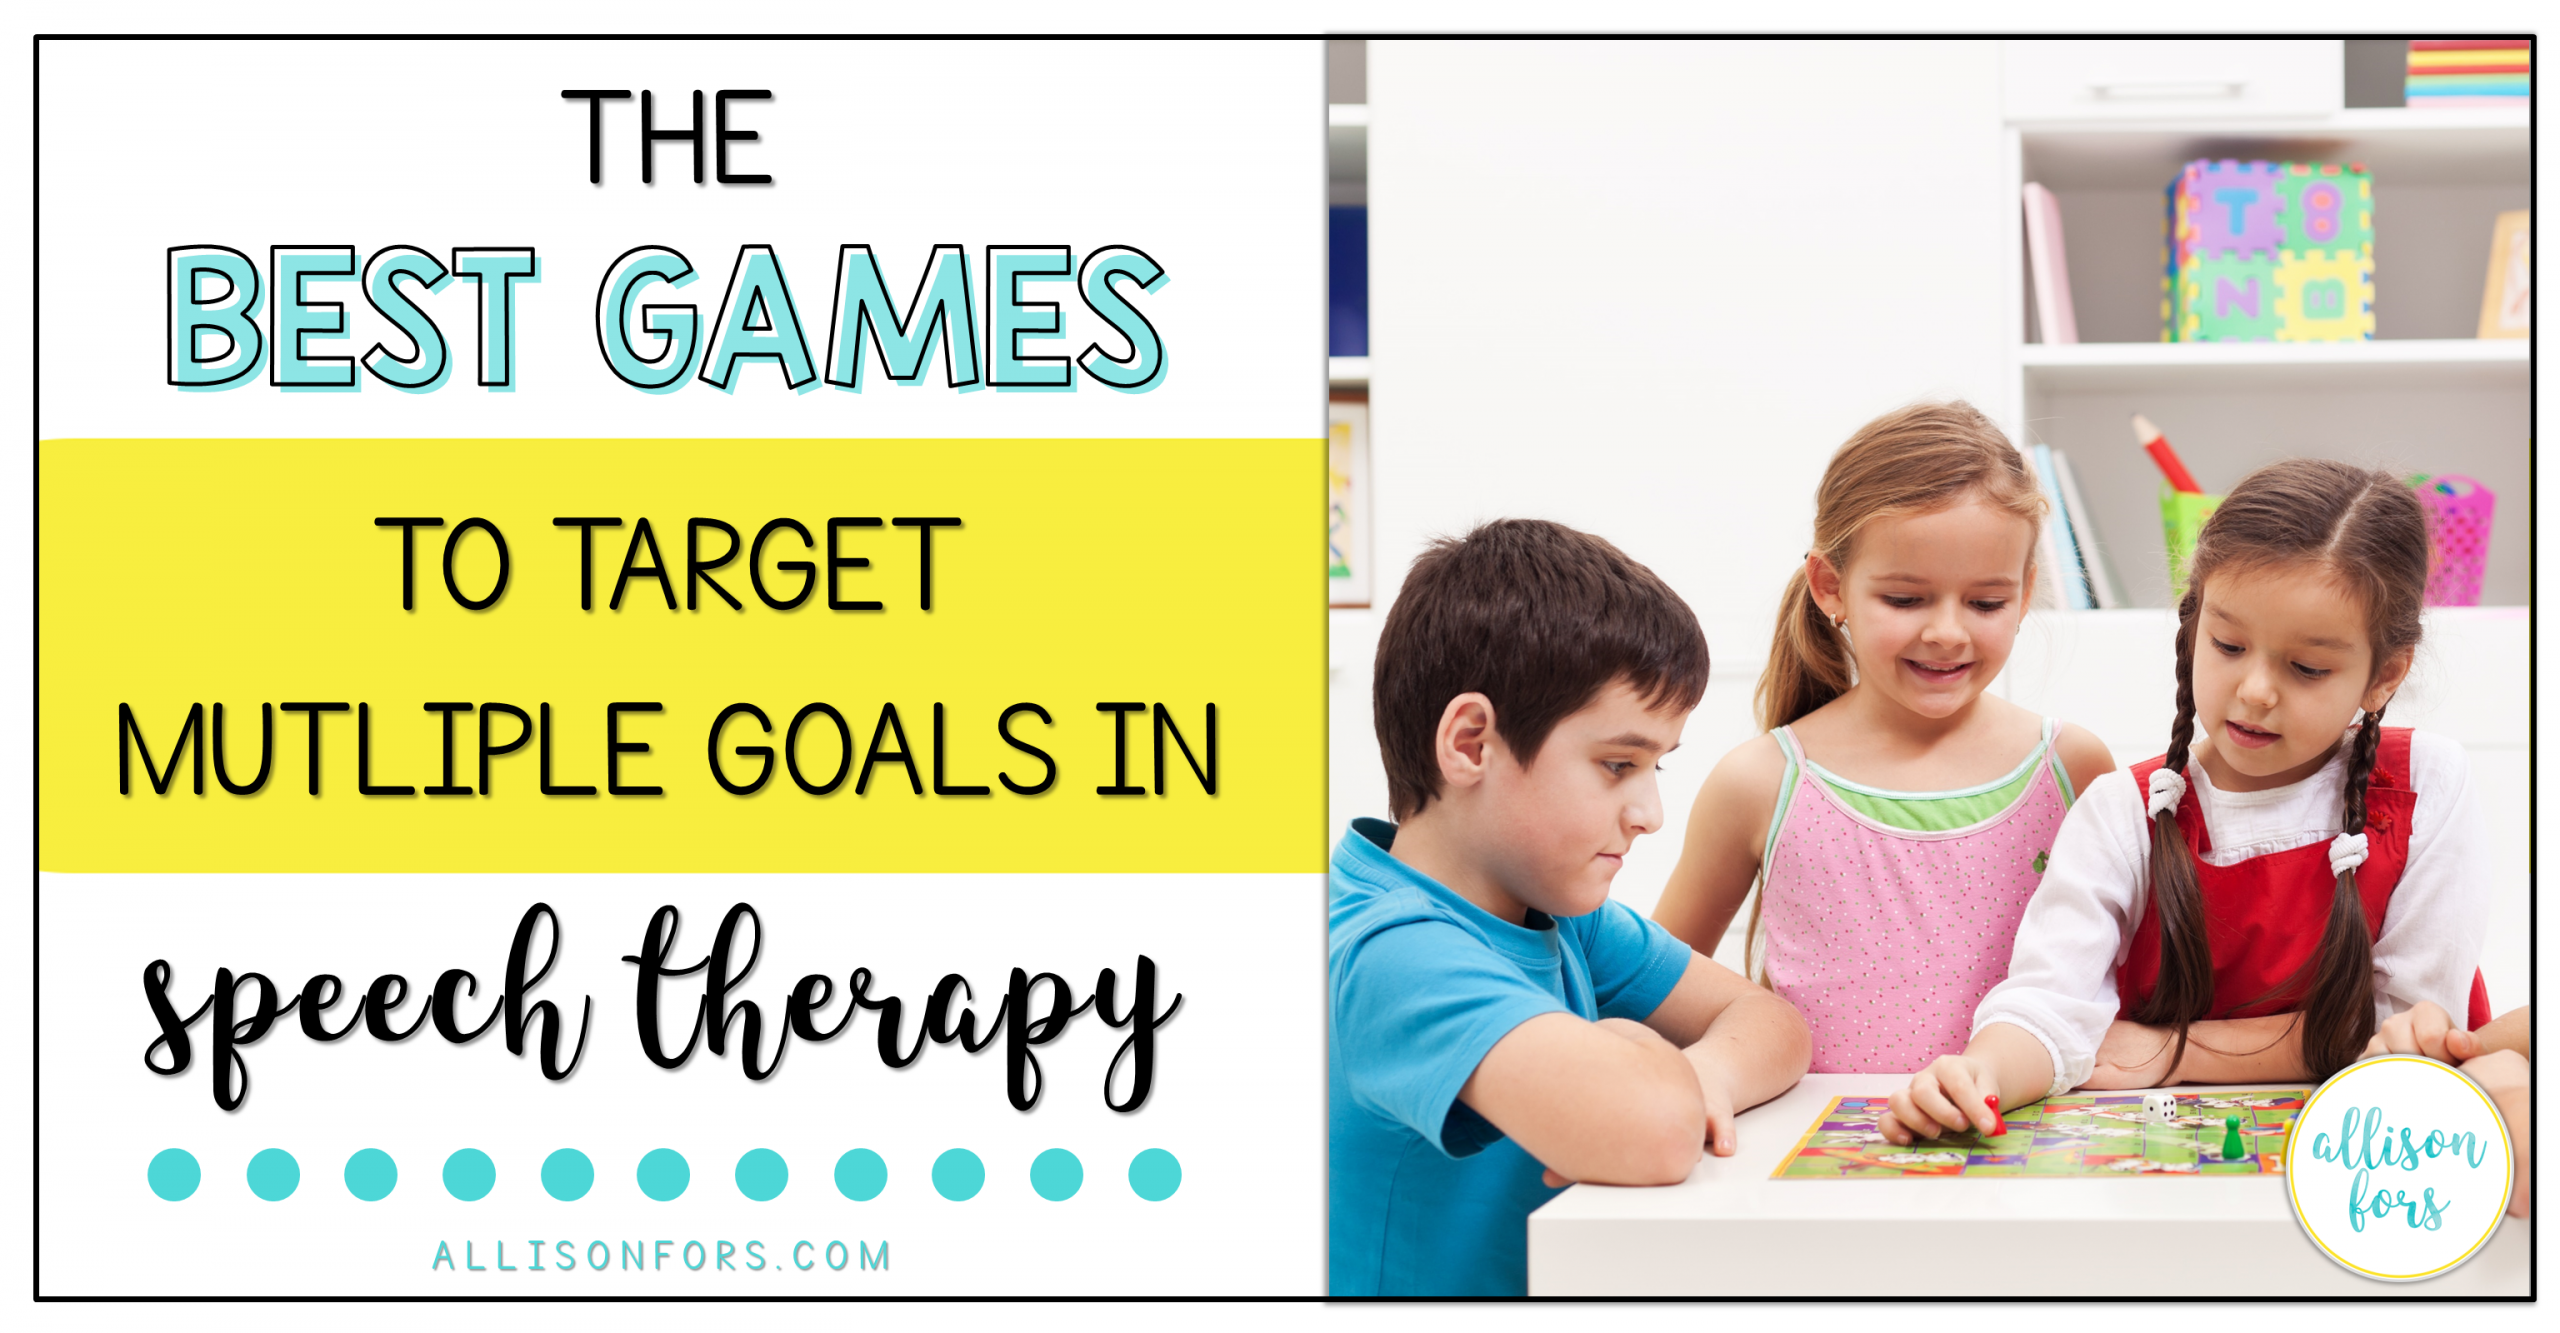 The Best Games to Target Multiple Goals in Speech Therapy